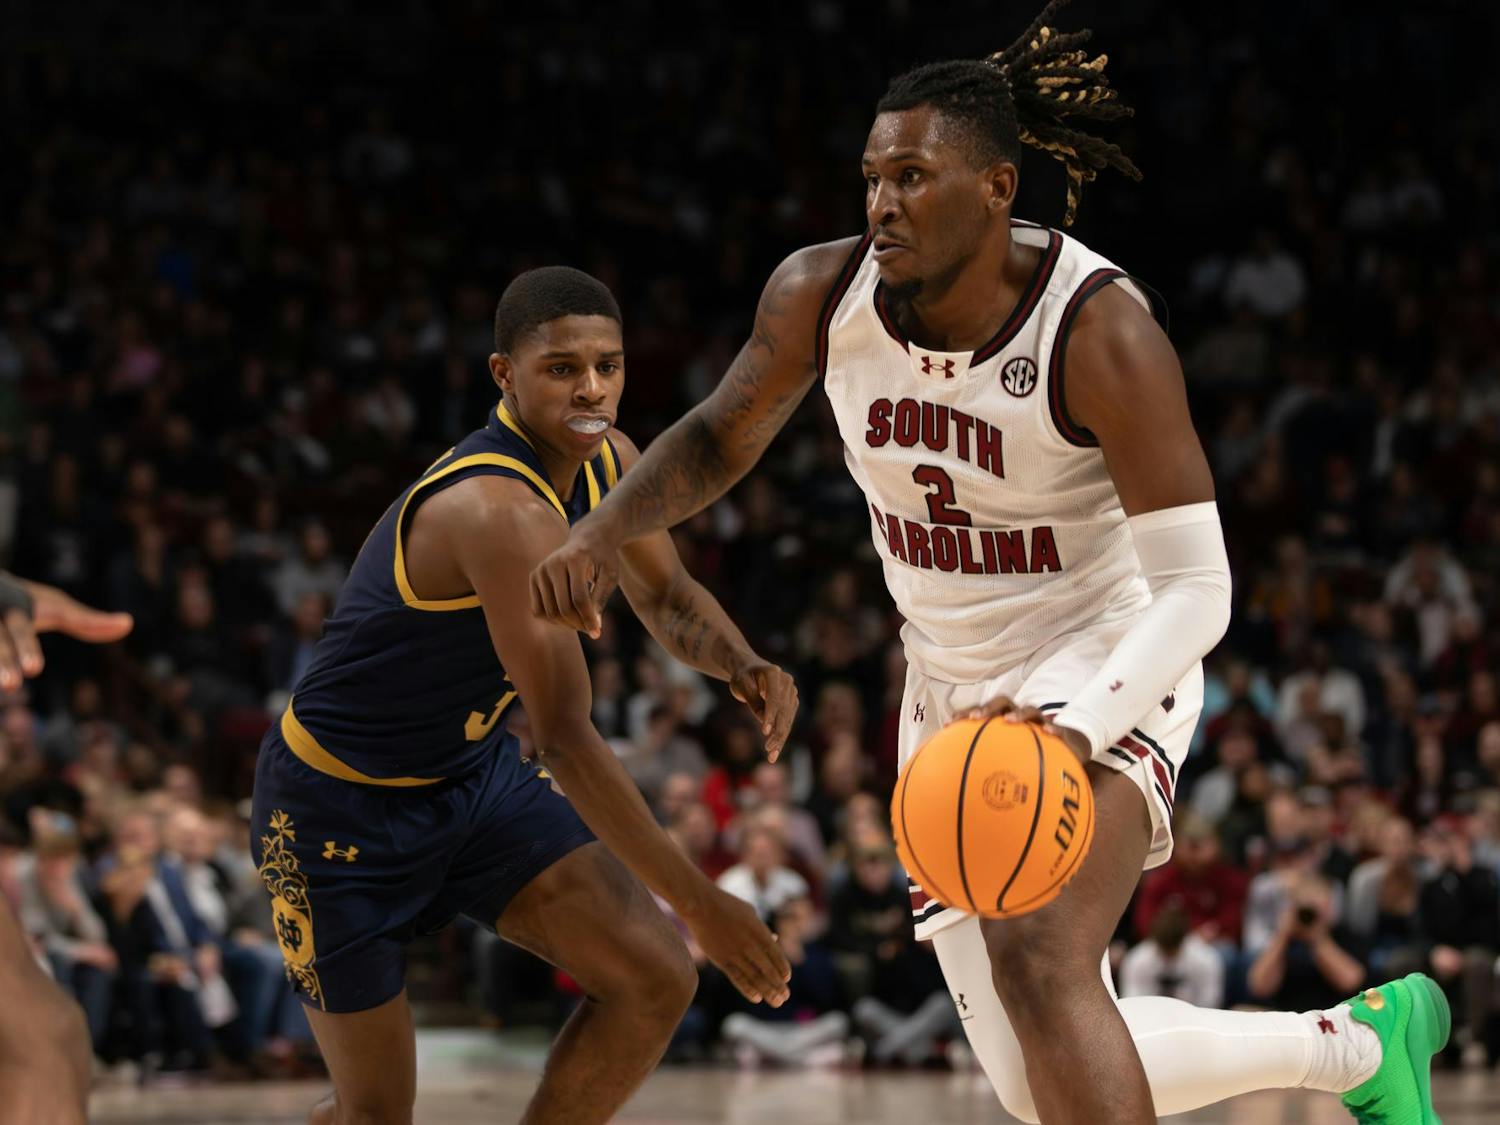 Graduate forward B.J. Mack dribbles past a Notre Dame defender towards the hoop on Nov. 28, 2023. Mack ended the game with a total of 17 points and was the Gamecocks' second leading scorer in the win over the Fighting Irish.